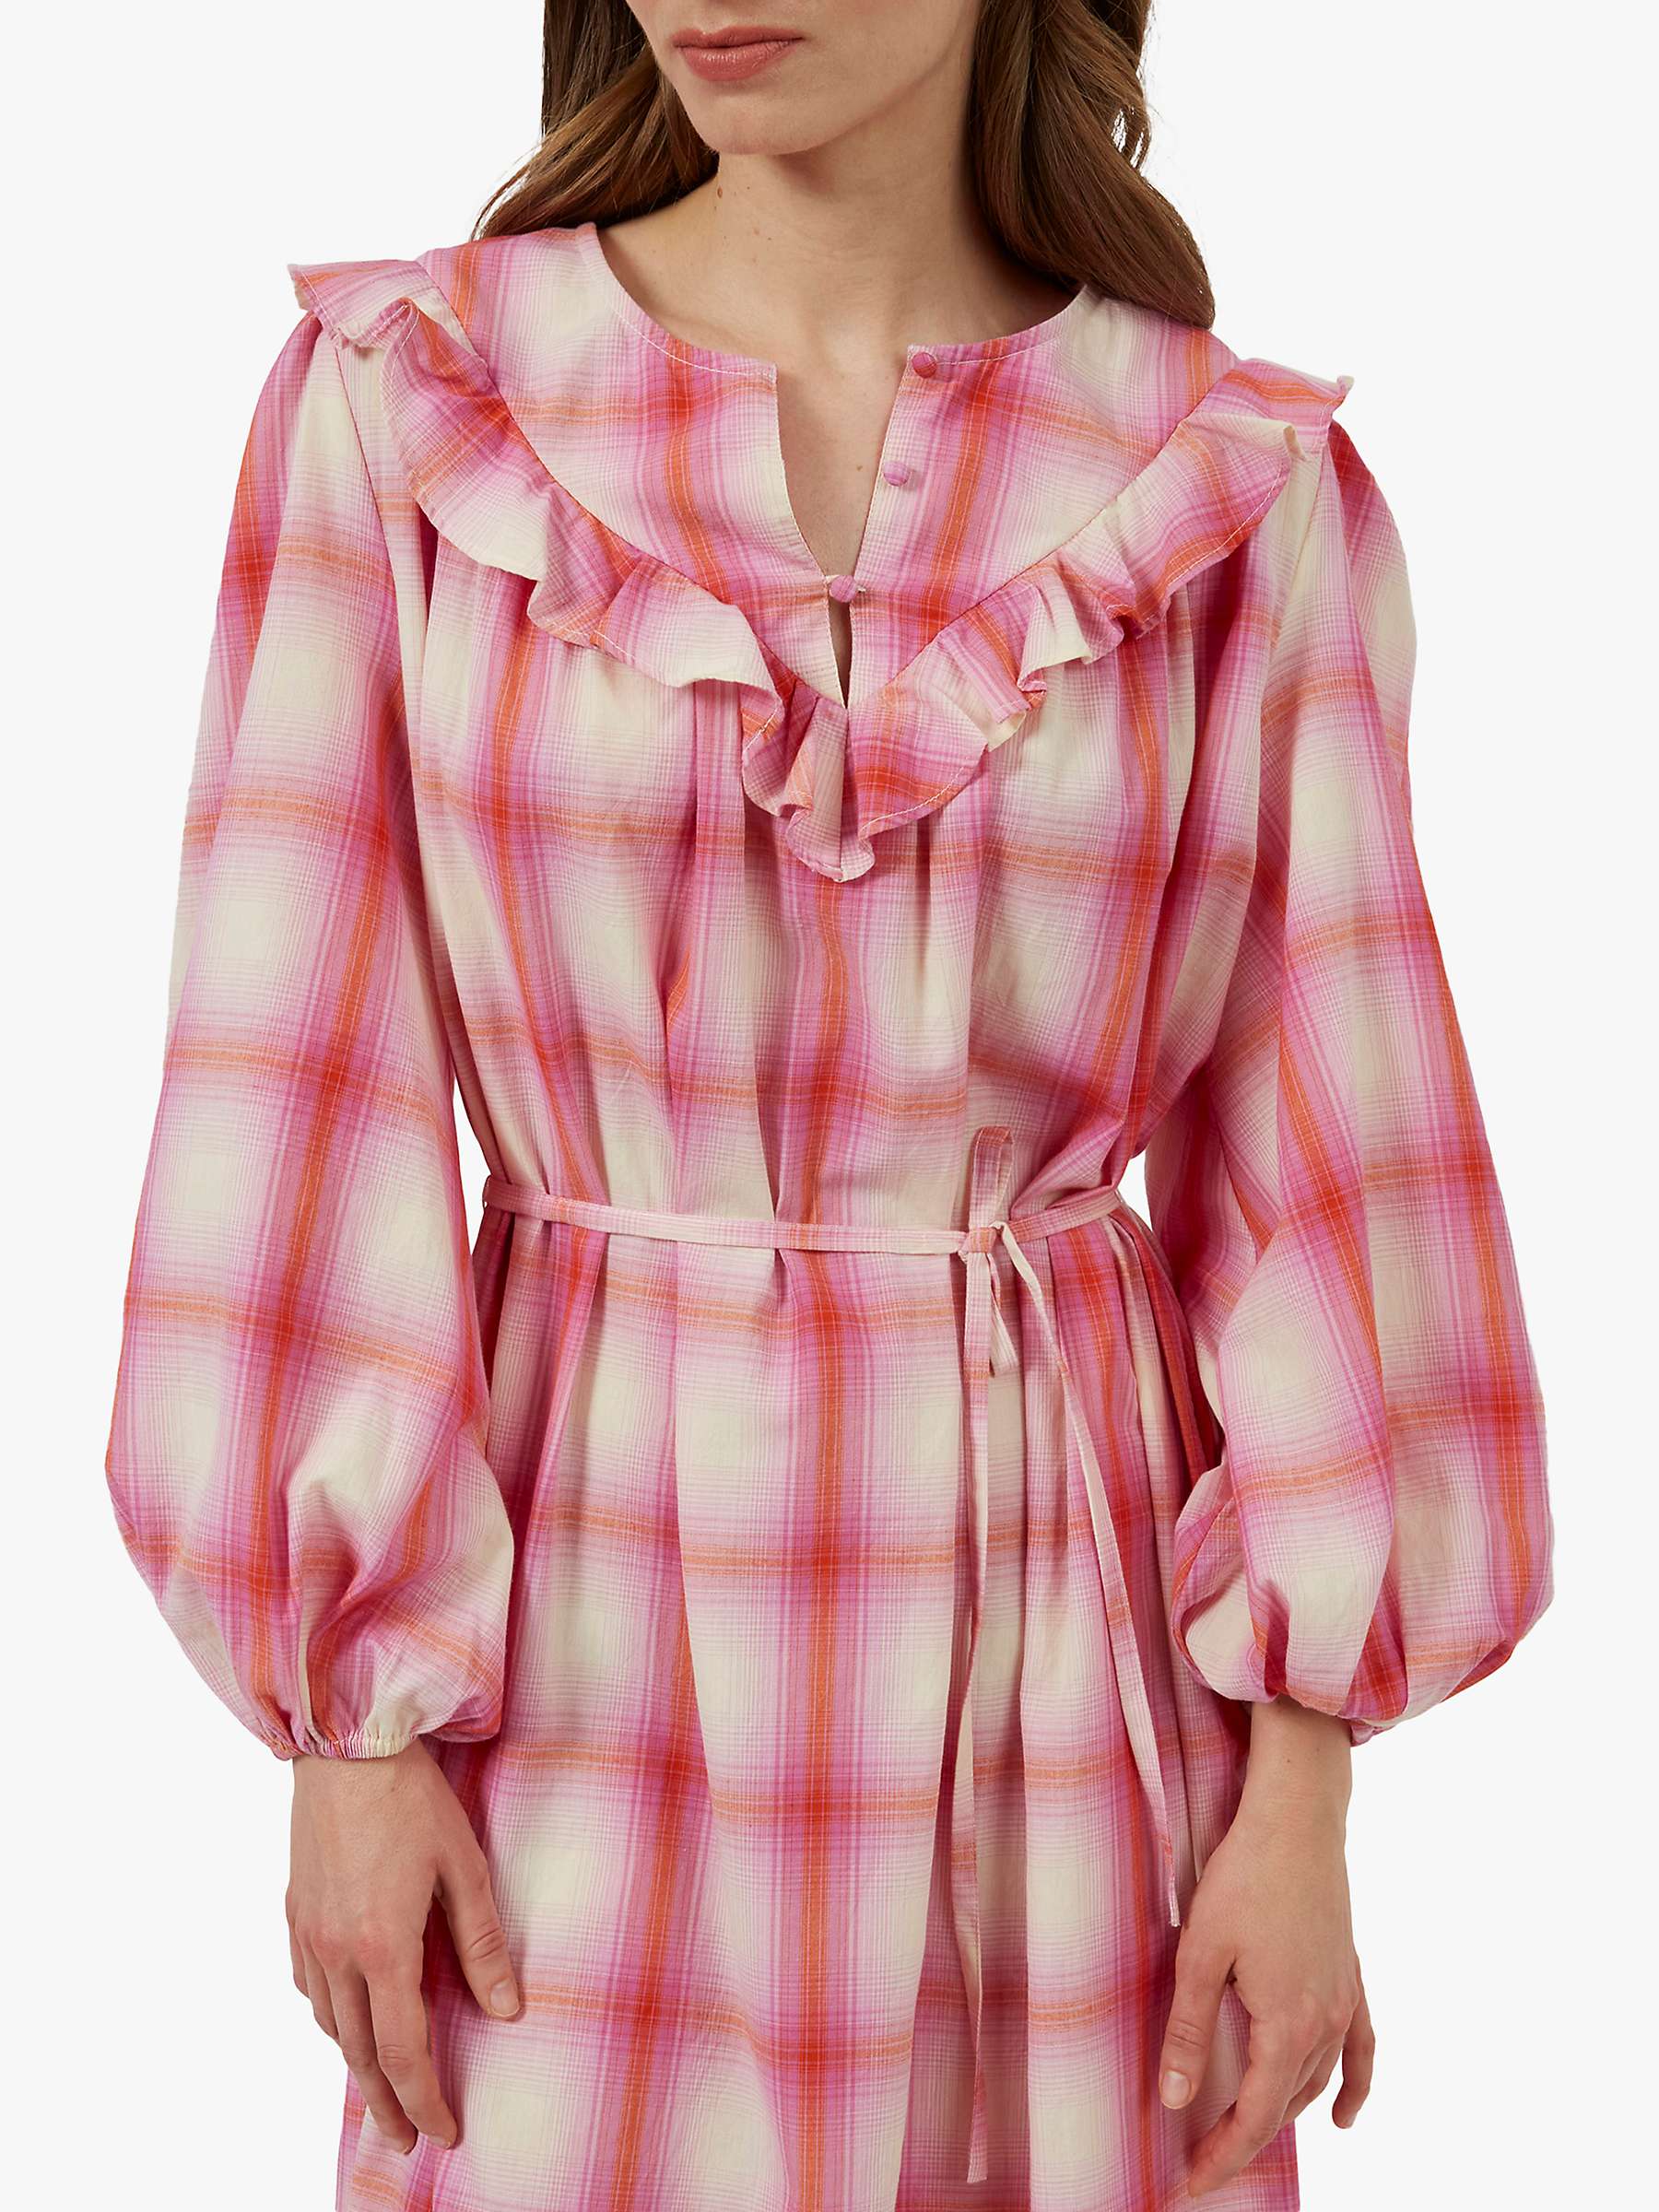 Buy Great Plains Aruba Check Belted Midi Dress, Pink Online at johnlewis.com